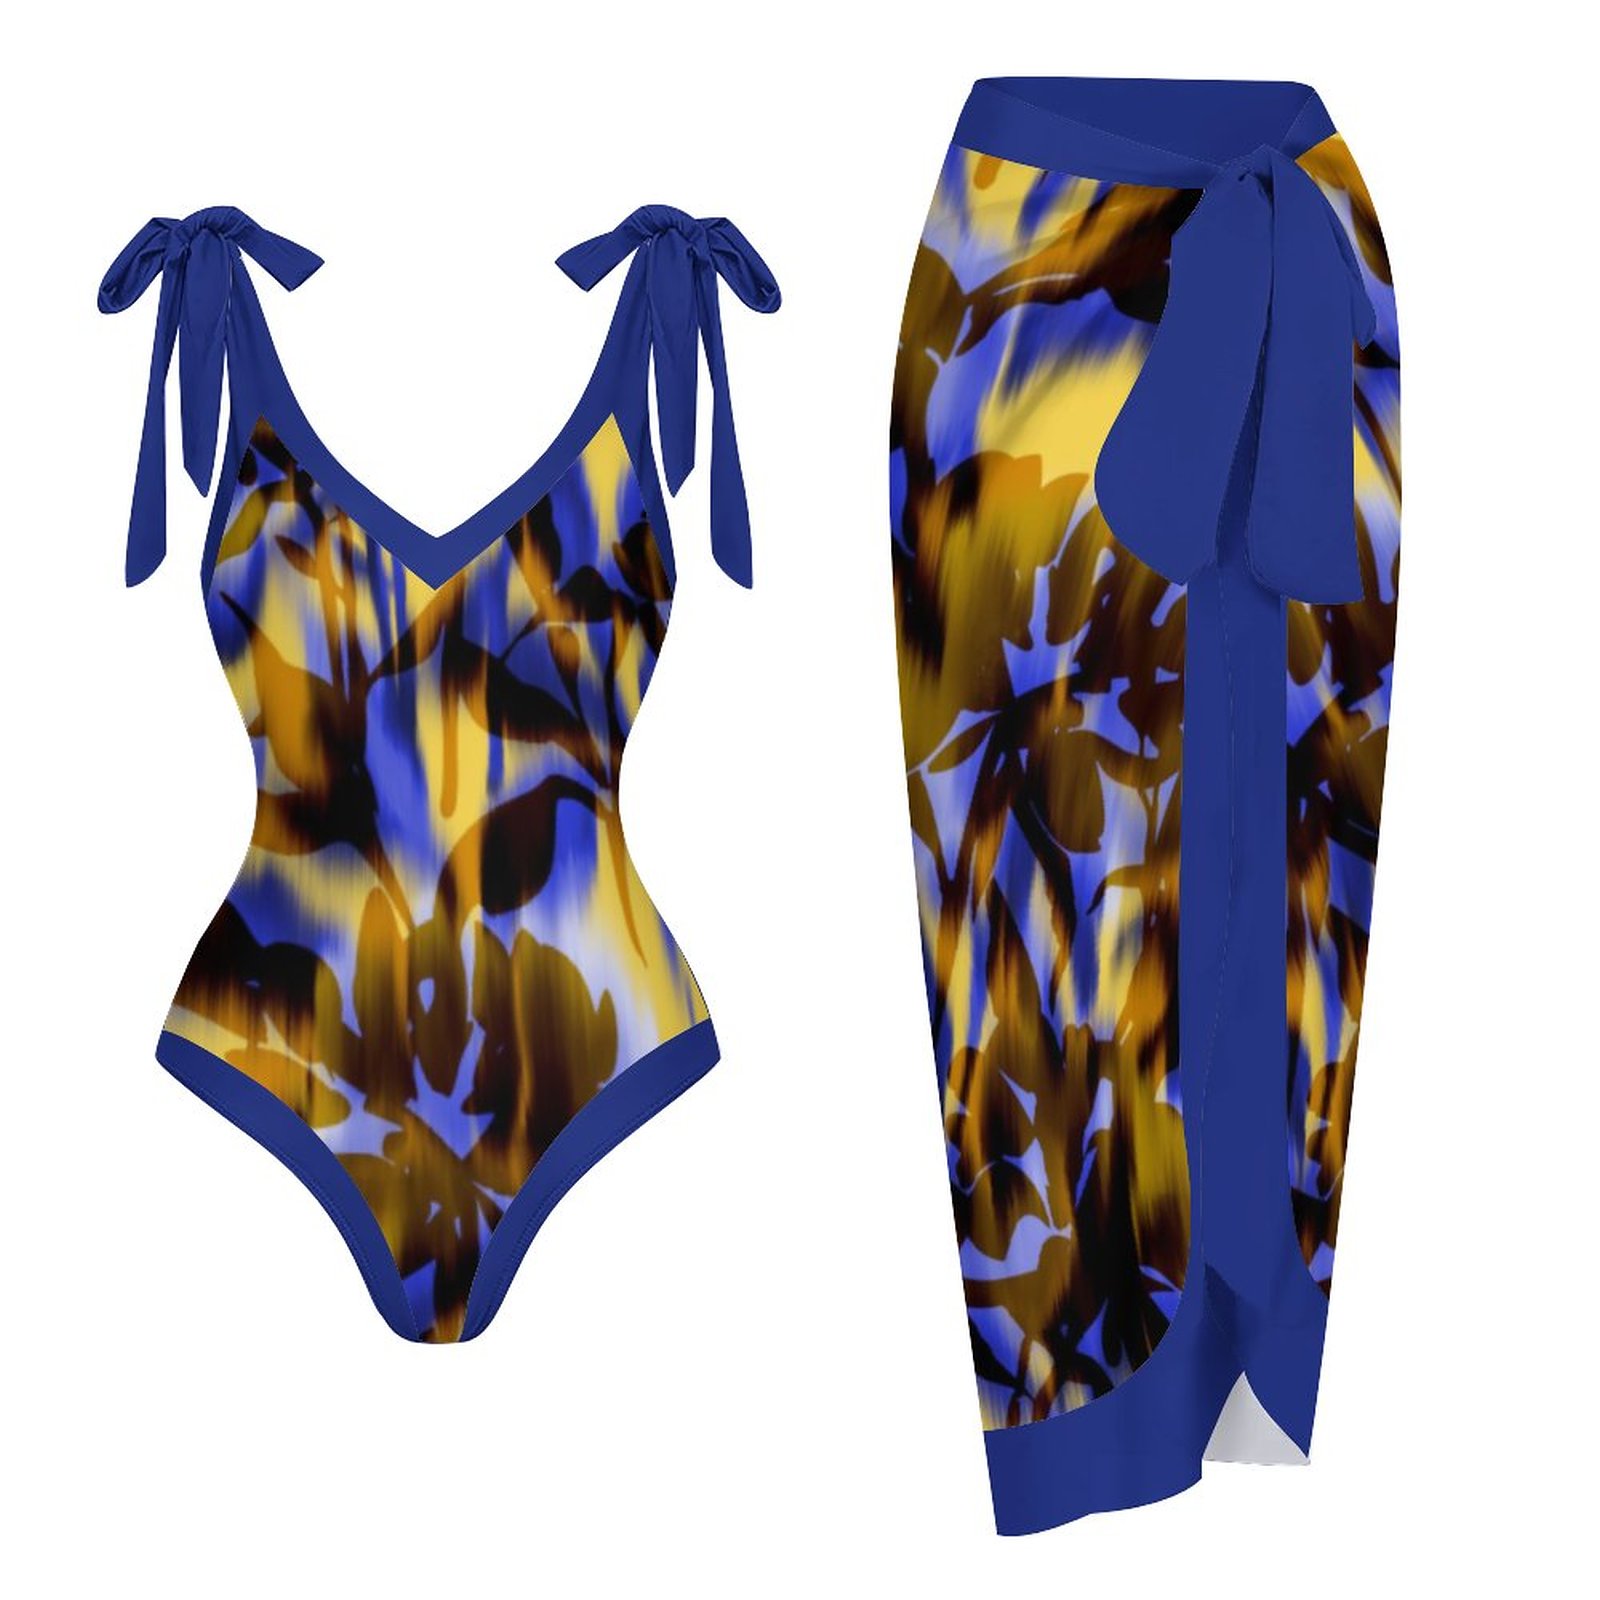 Casual Printed One-Piece Swimsuit And Cover Up